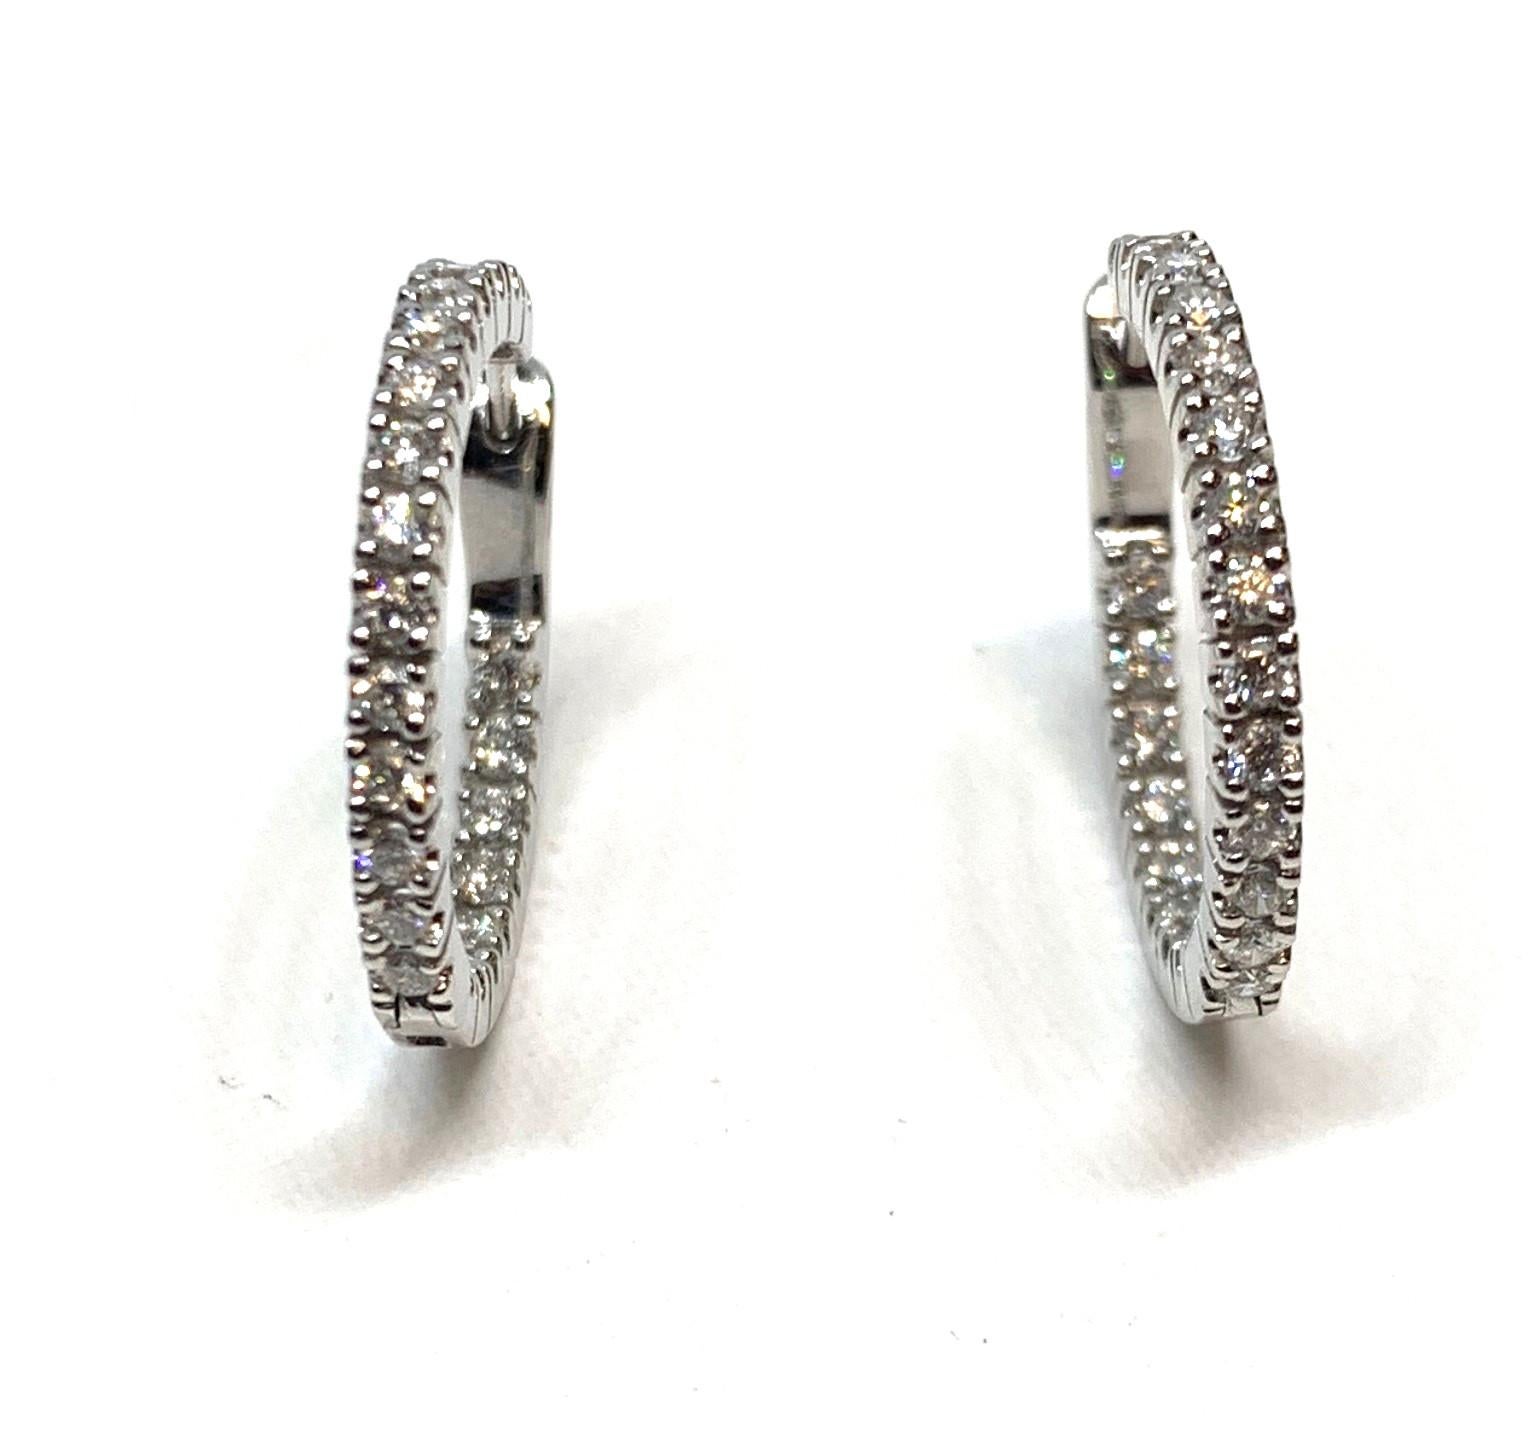 These diamond hoops are a an updated twist on the classic style. They are set with diamonds on the outside as well as the inside of each hoop! Forty-four round brilliant cut diamonds  provide endless sparkle. Made of 18k white gold. A perfect gift